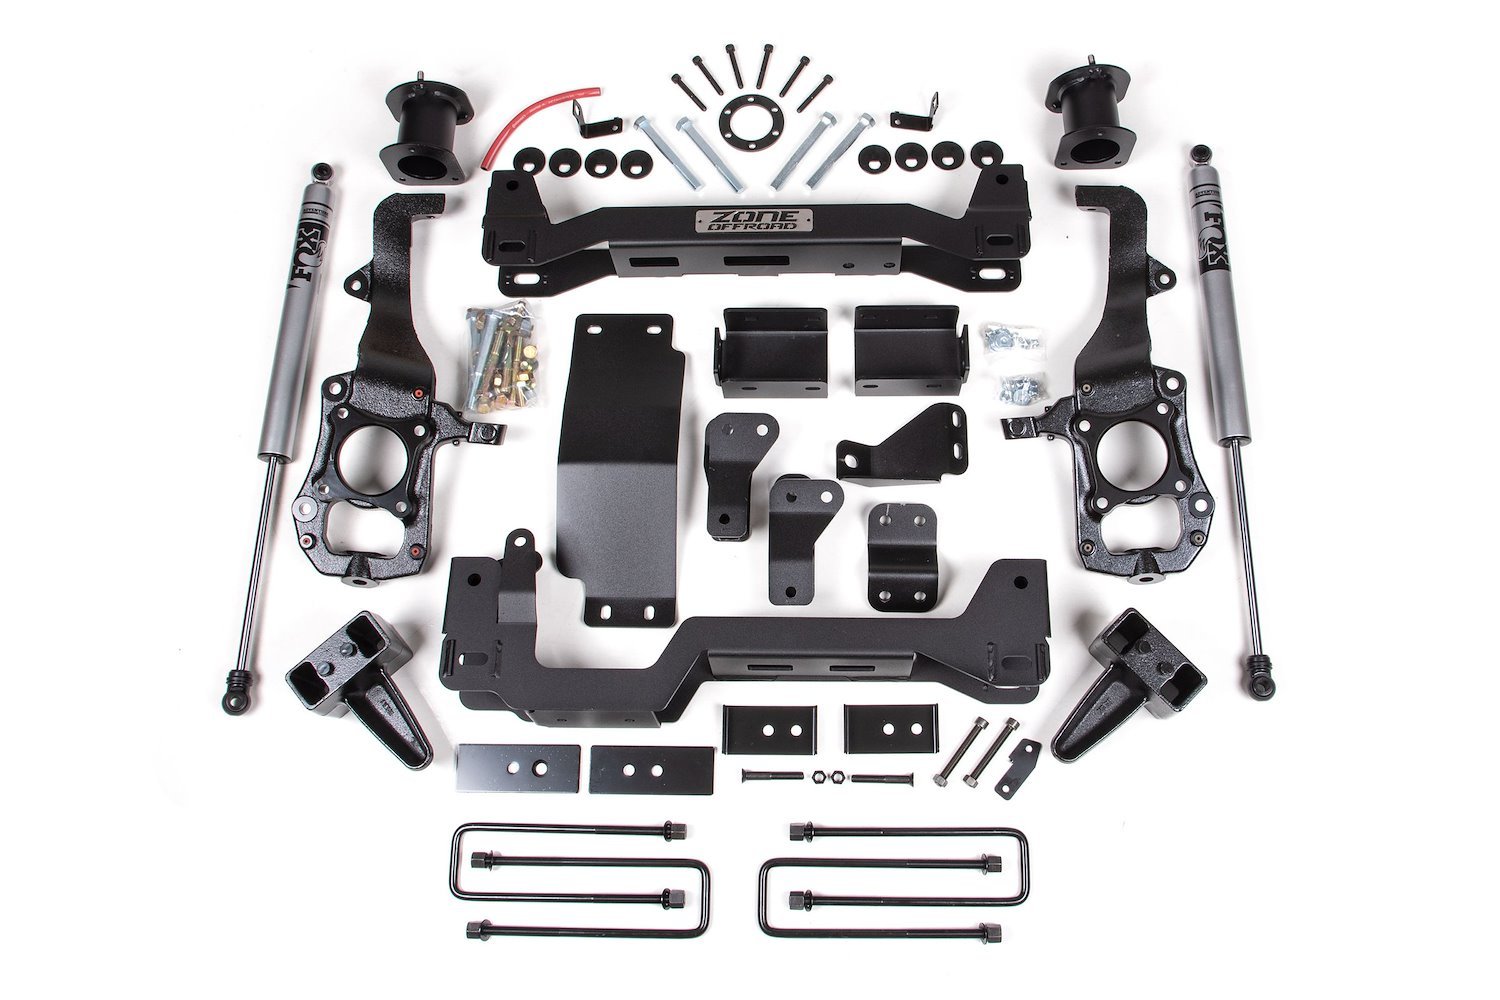 ZONF90F Zone 6" Lift Kit for Fits Select Ford F-150